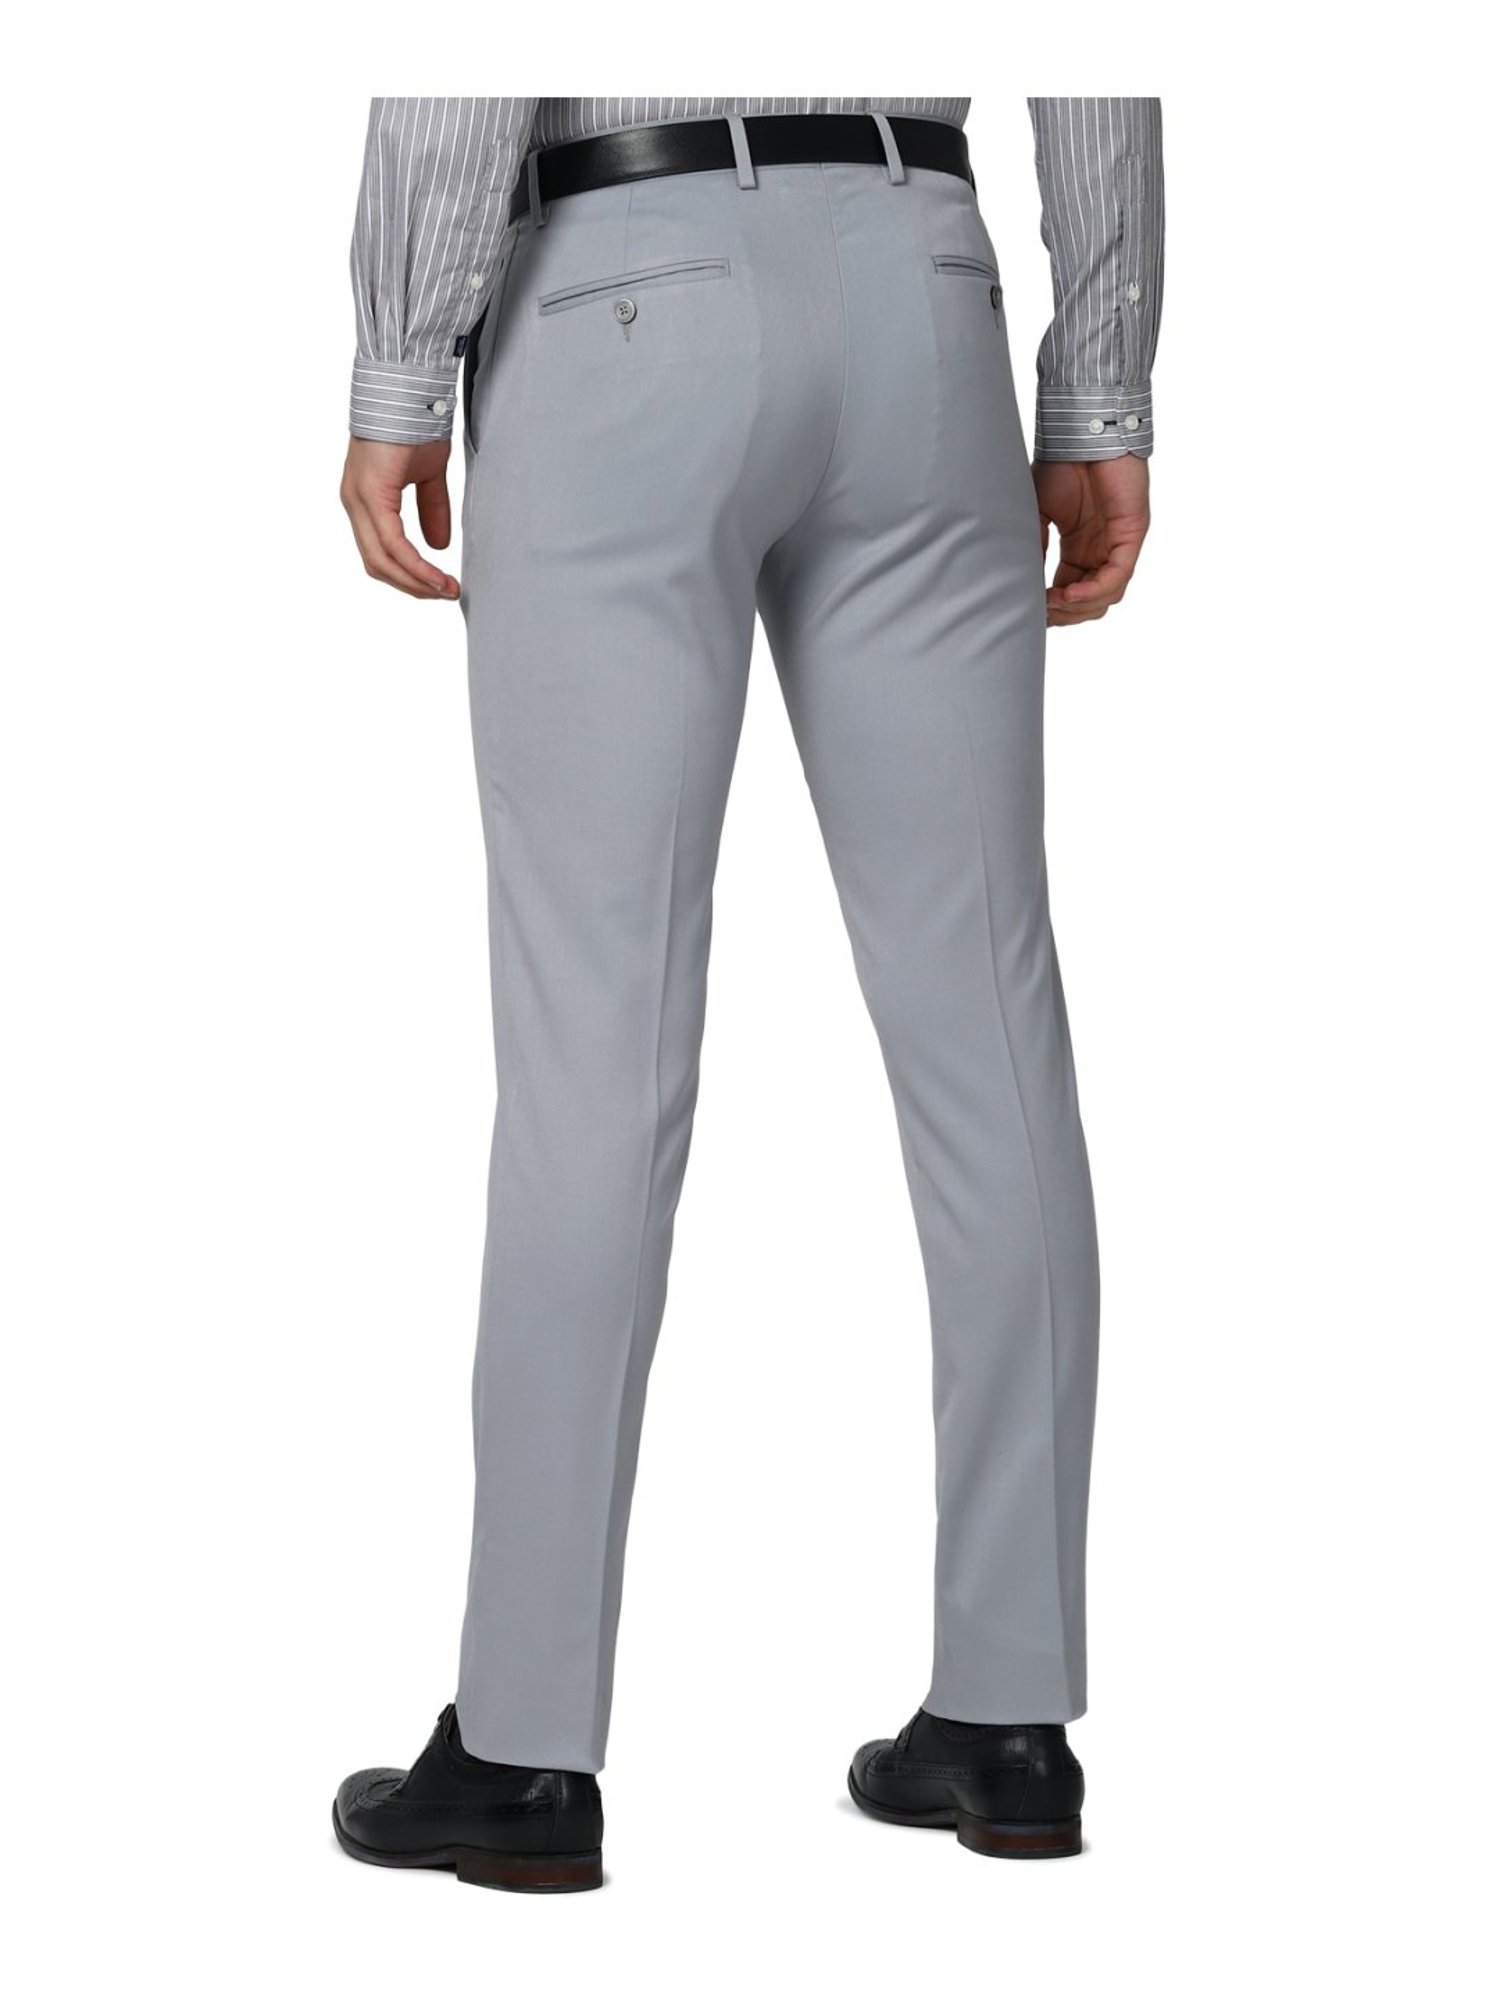 Peter England Mens Grey Trousers